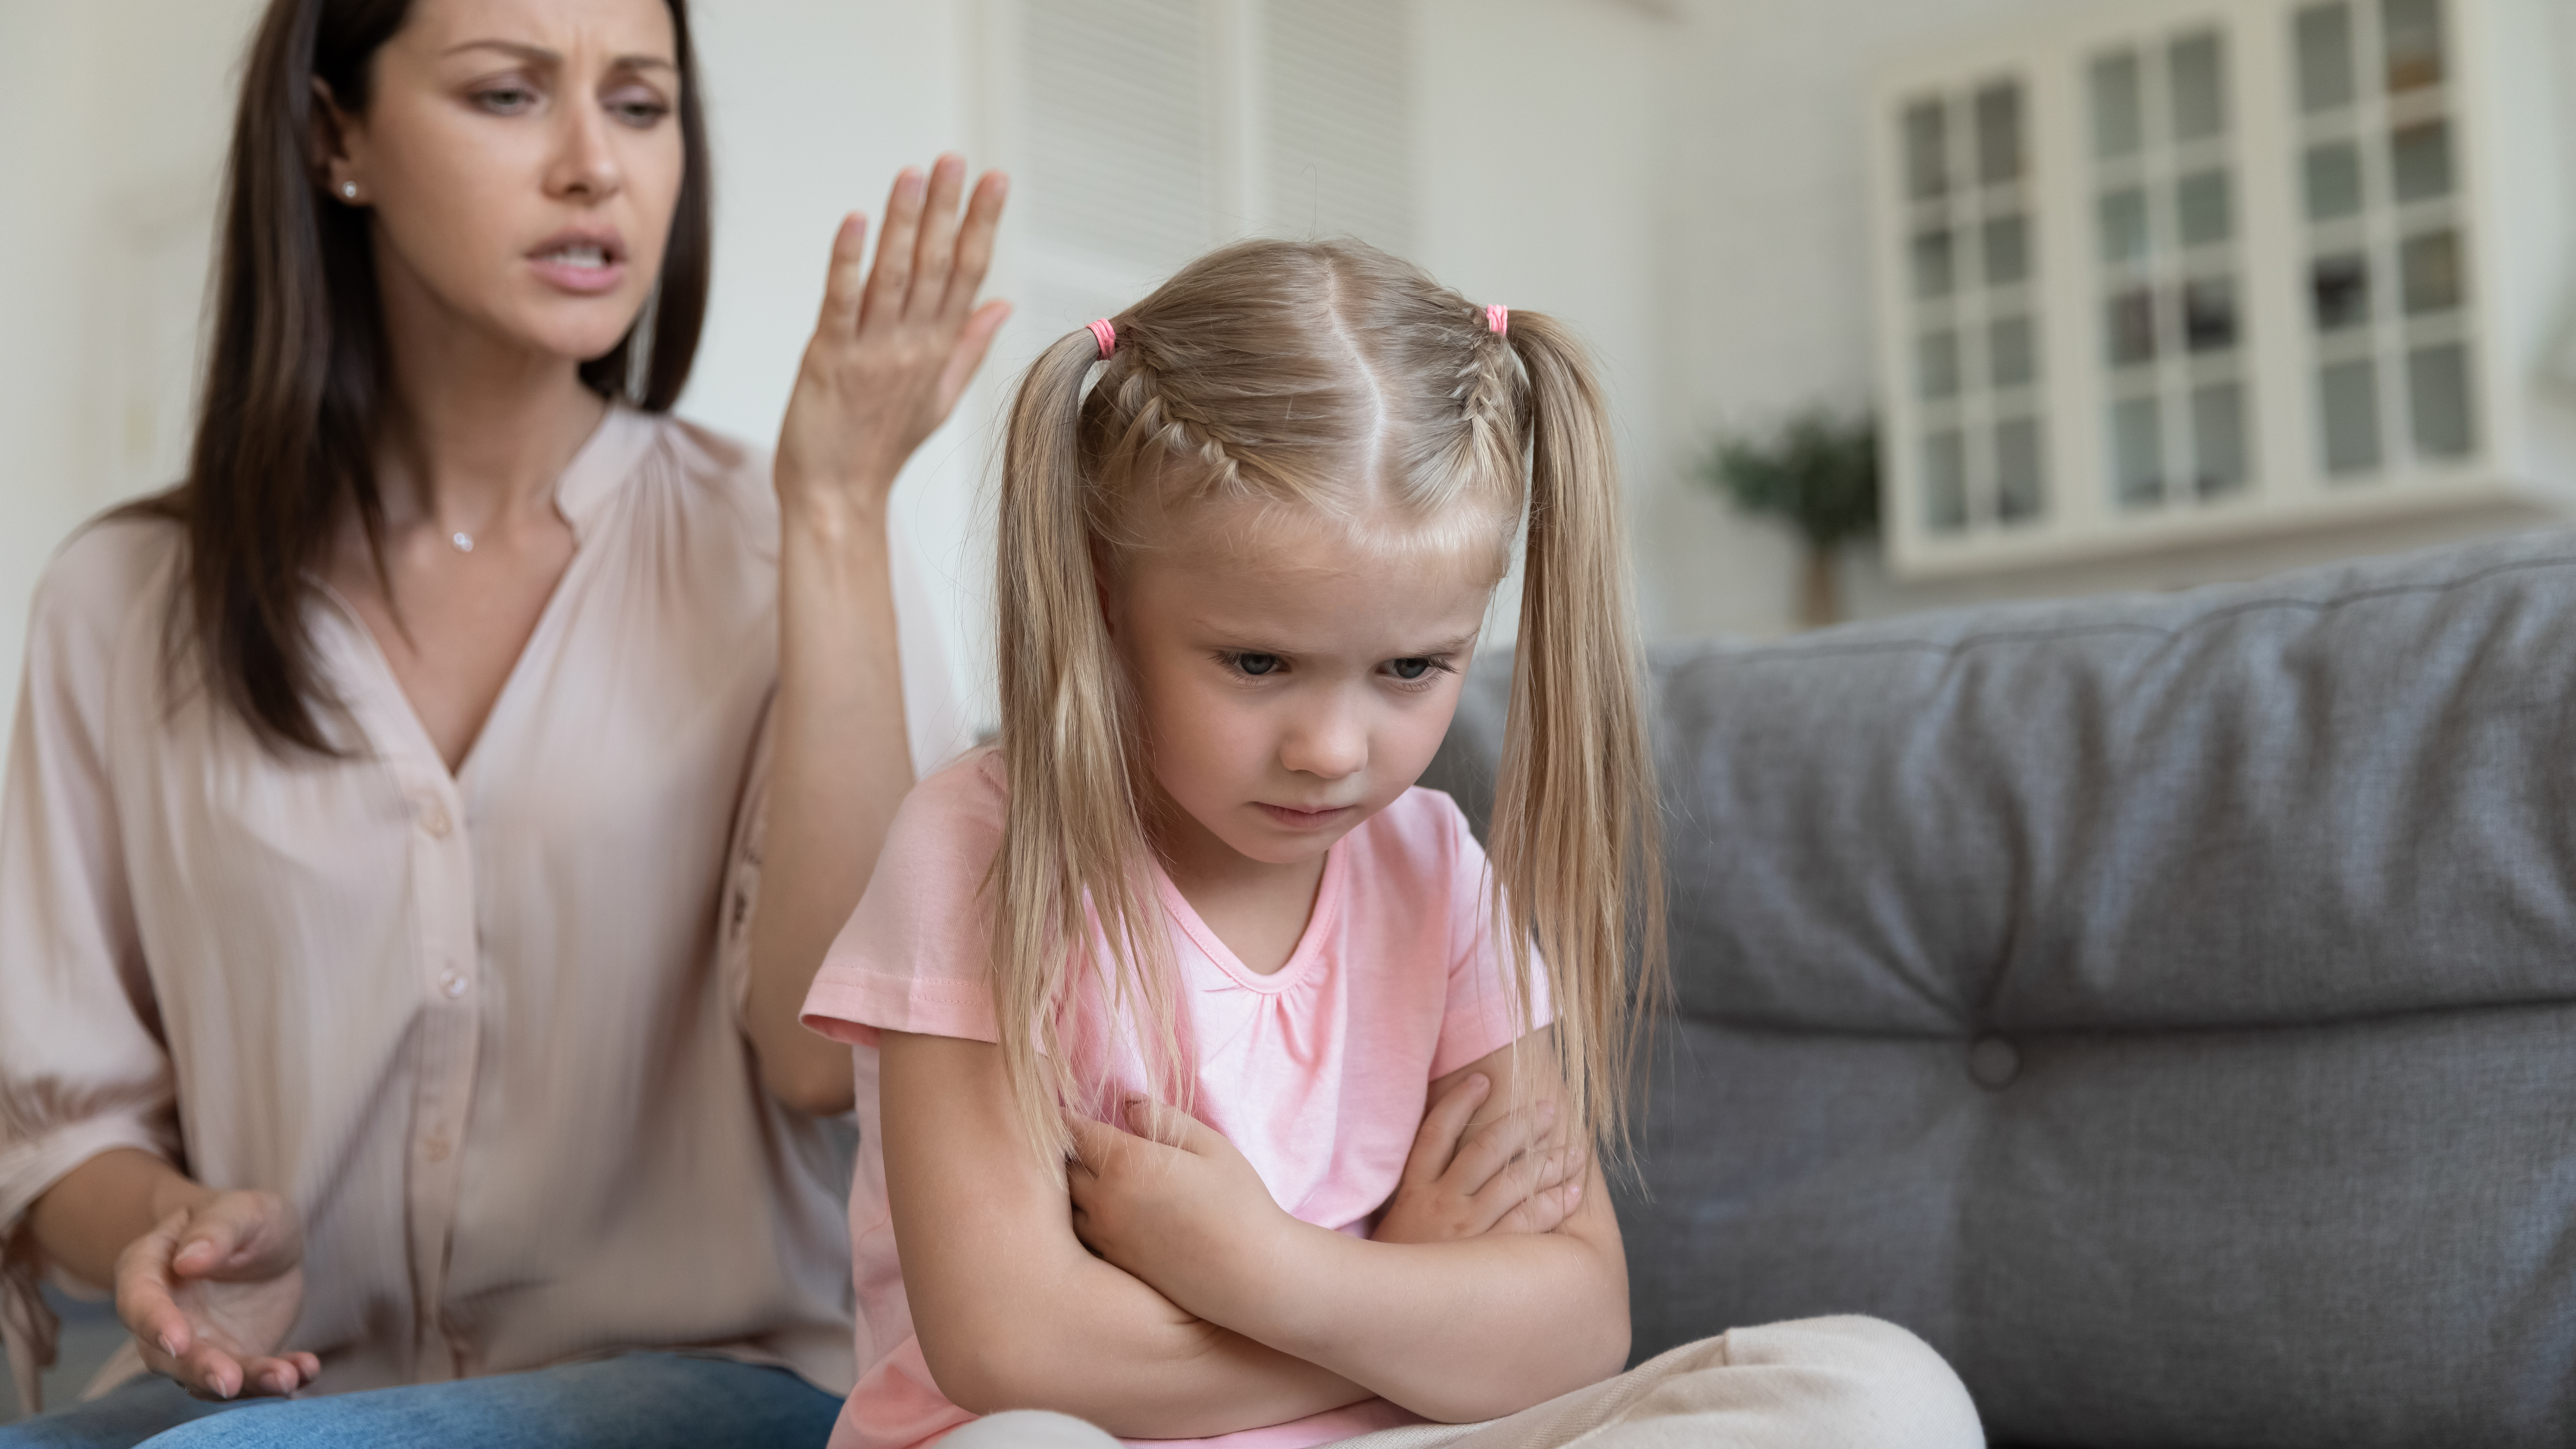 A mother tries to school her angry little daughter | Source: Shutterstock